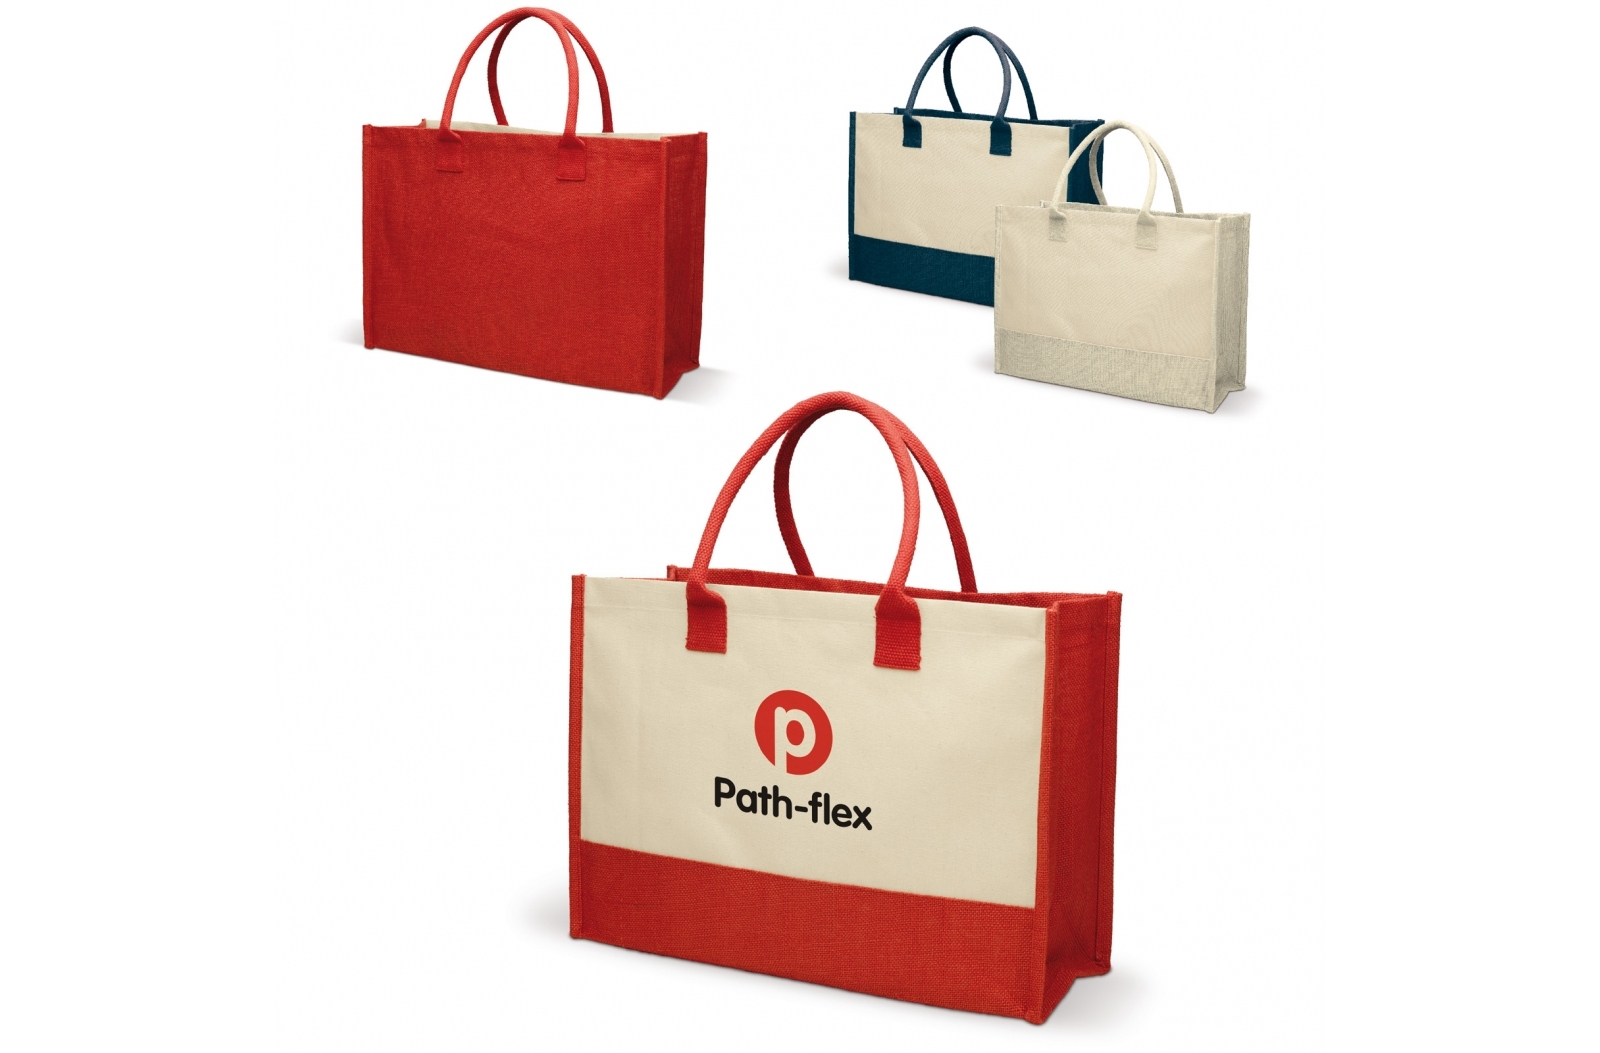 A shopping bag made from a mix of jute and canvas materials, featuring handles made from cotton rope. - Harby